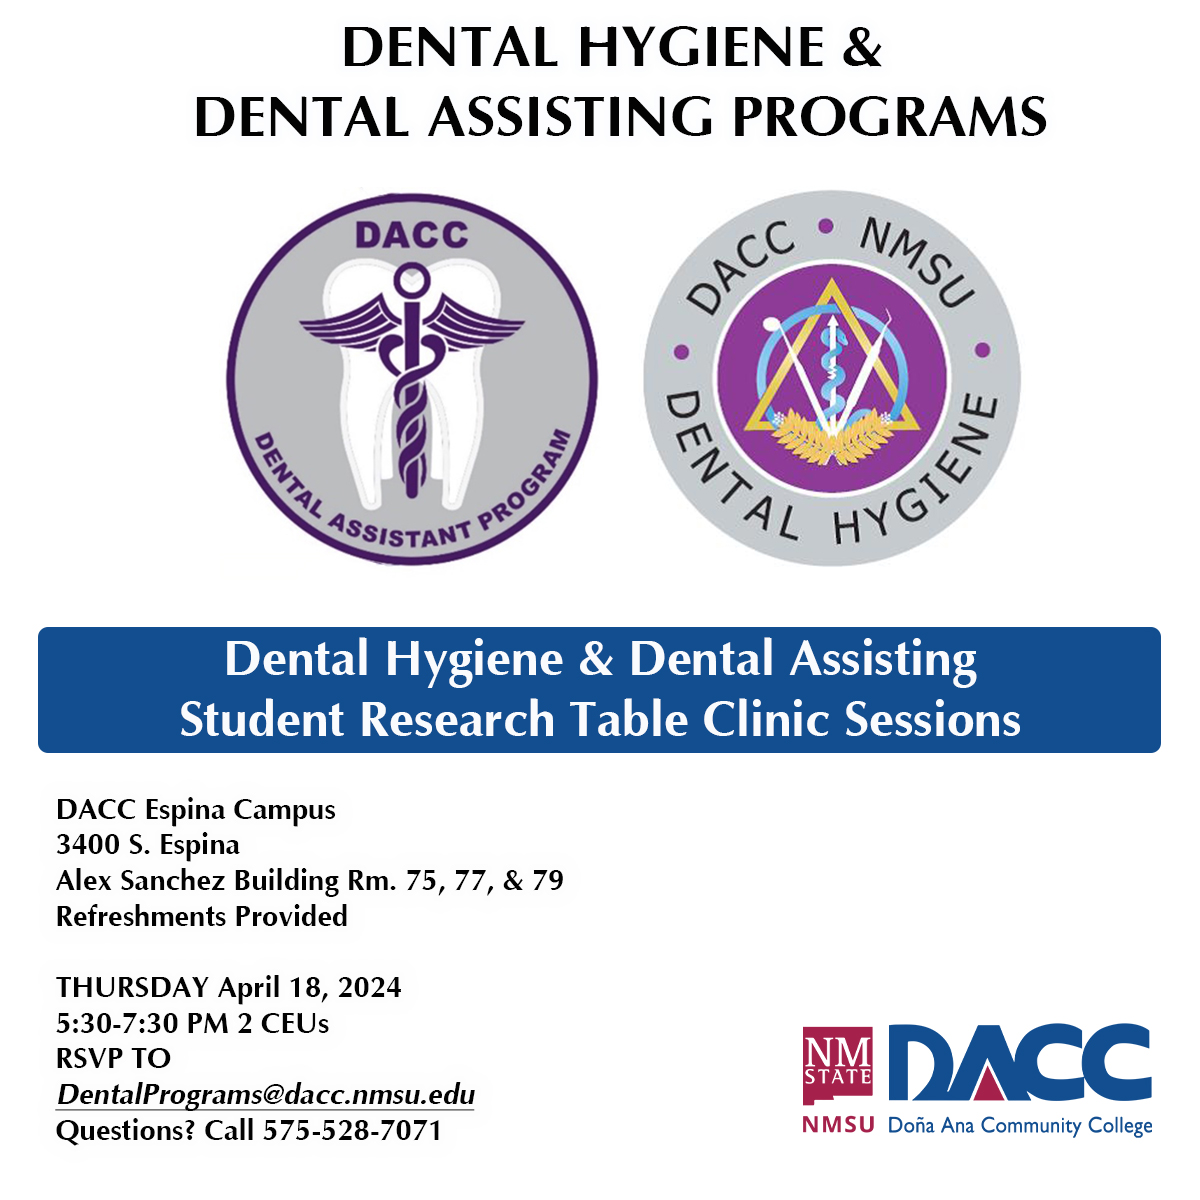 Join us for the Dental Hygiene & Dental Assisting Student Research Table Clinic Sessions. Thursday April 18, 2024 at the Espina Campus, Alex Sanchez Bldg. Rm 75, 77 & 79. From 5:30-7:30pm. RSVP to DentalPrograms@dacc.nmsu.edu Questions? Call 575-528-7071 #WeAreDACC